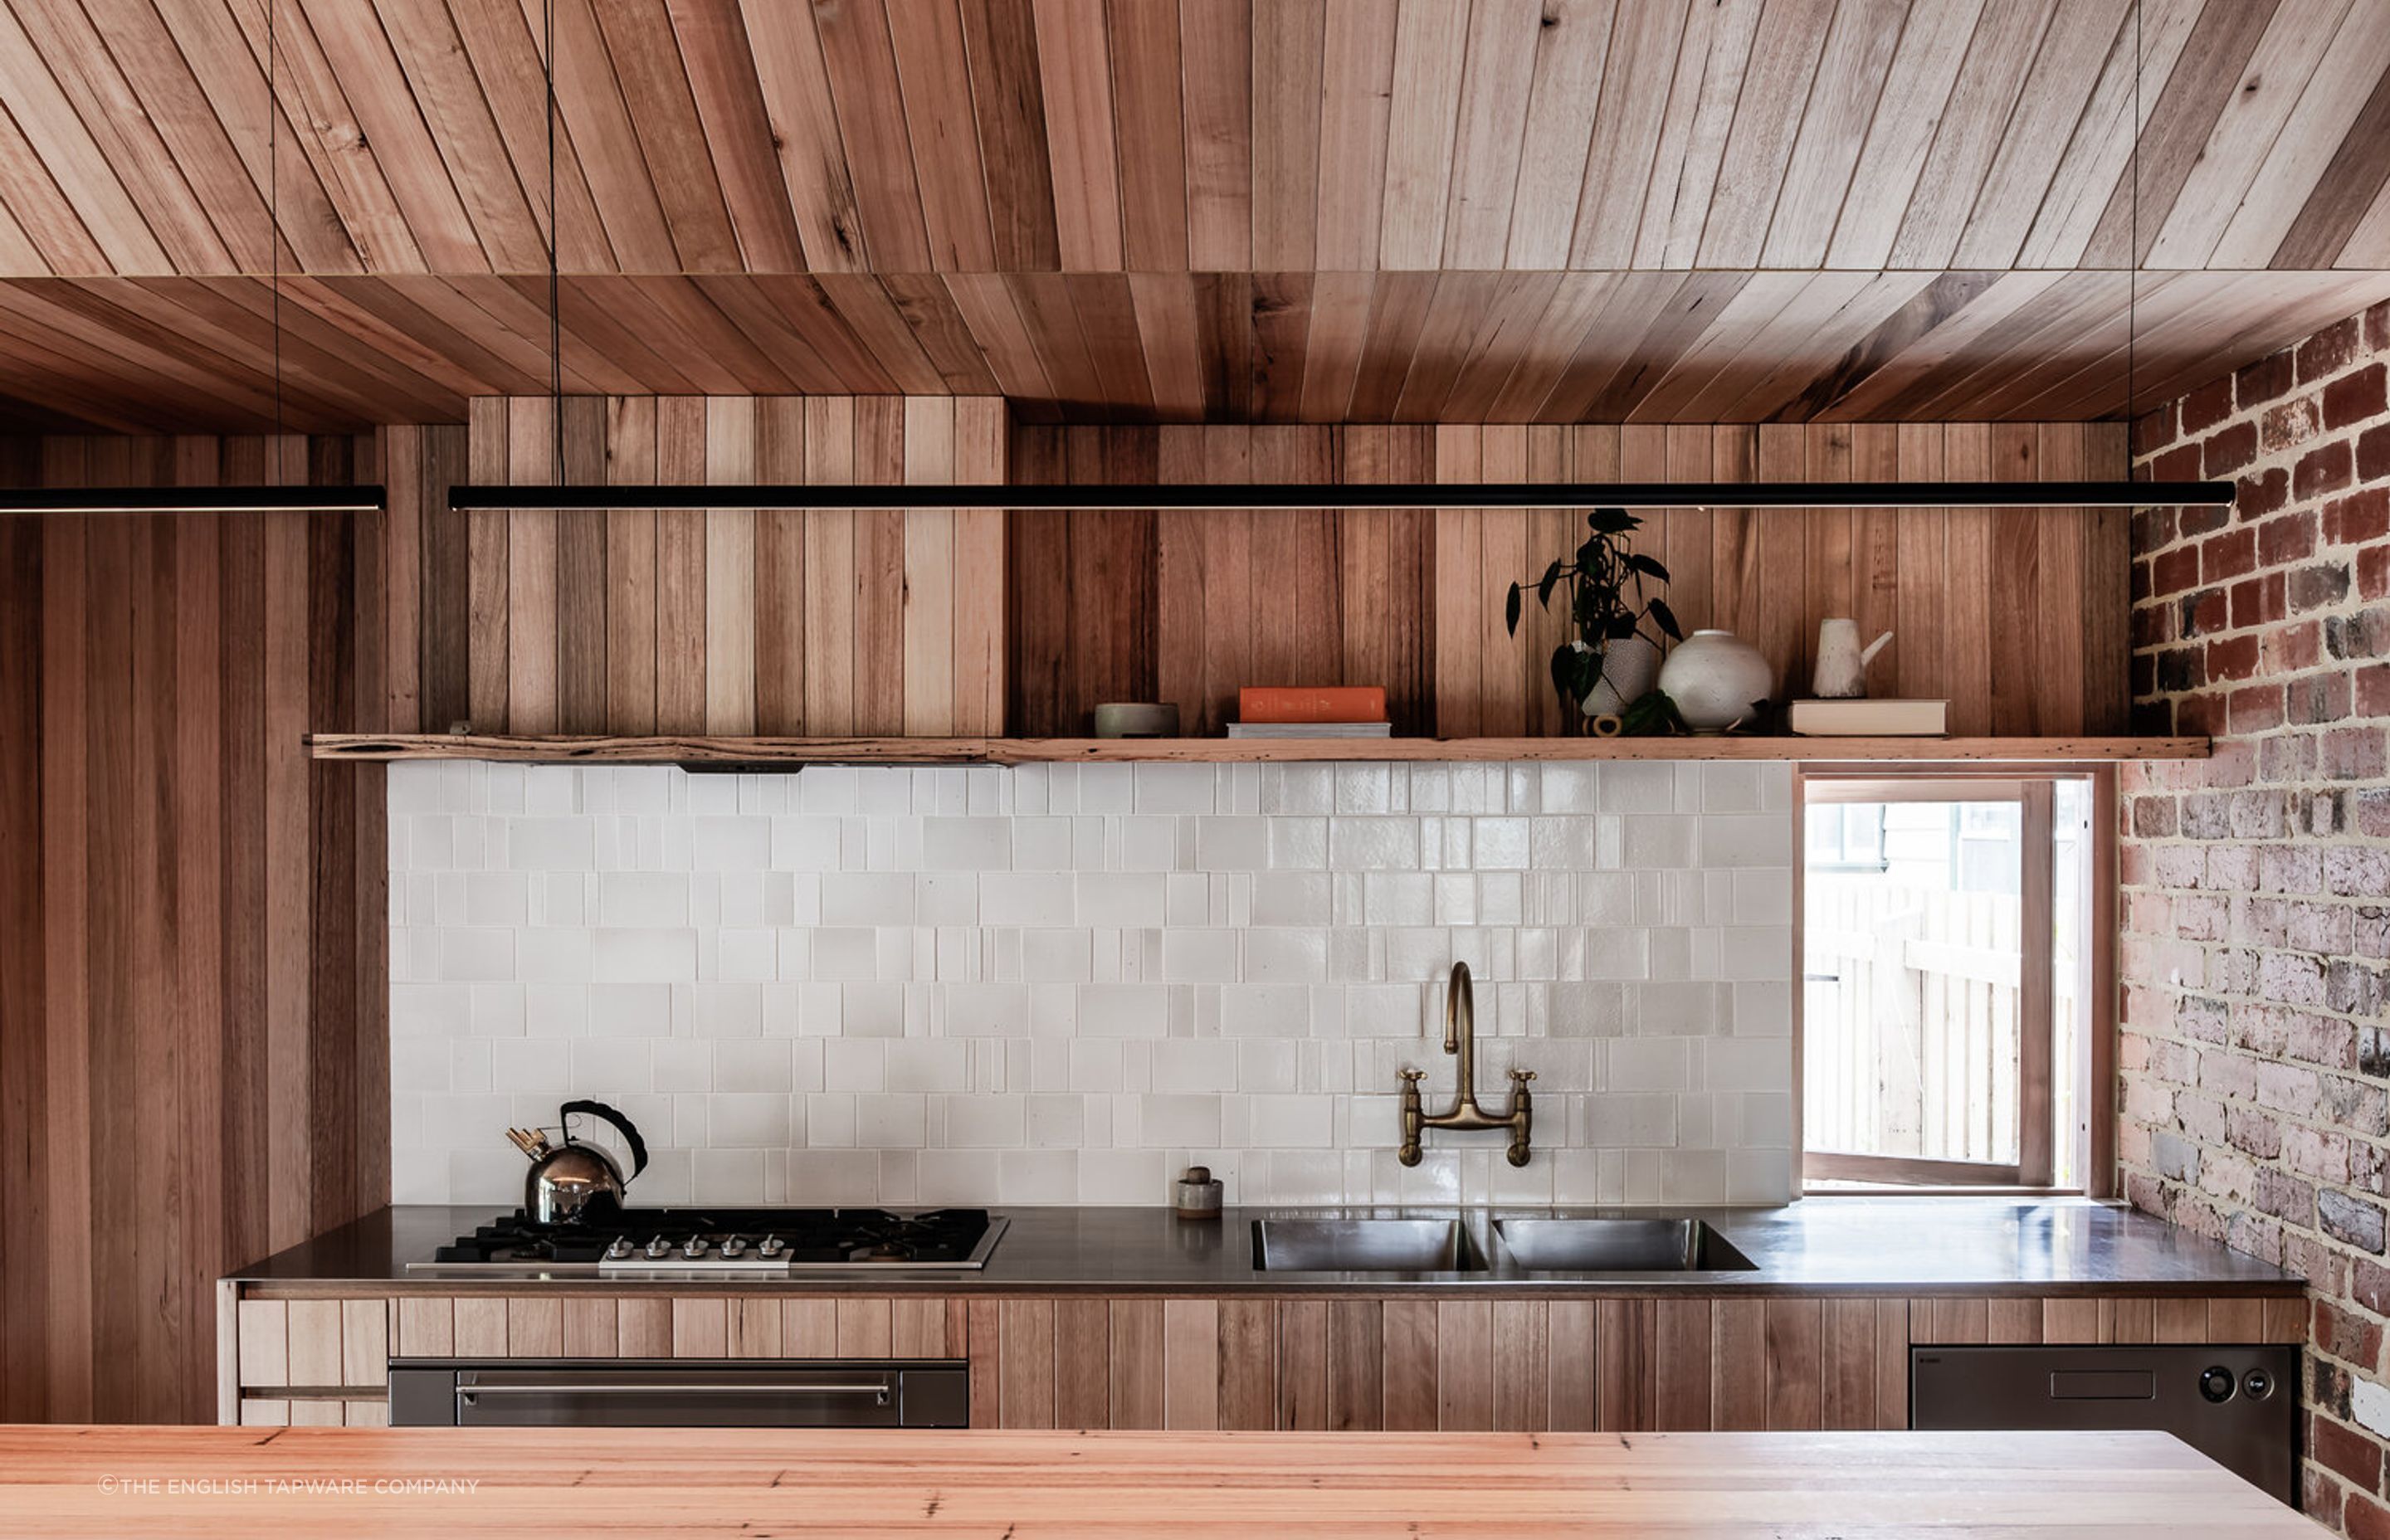 Textural warmth through wood, brick and tile in the Northcote Residence Kitchen - Photography: Tom Blachford